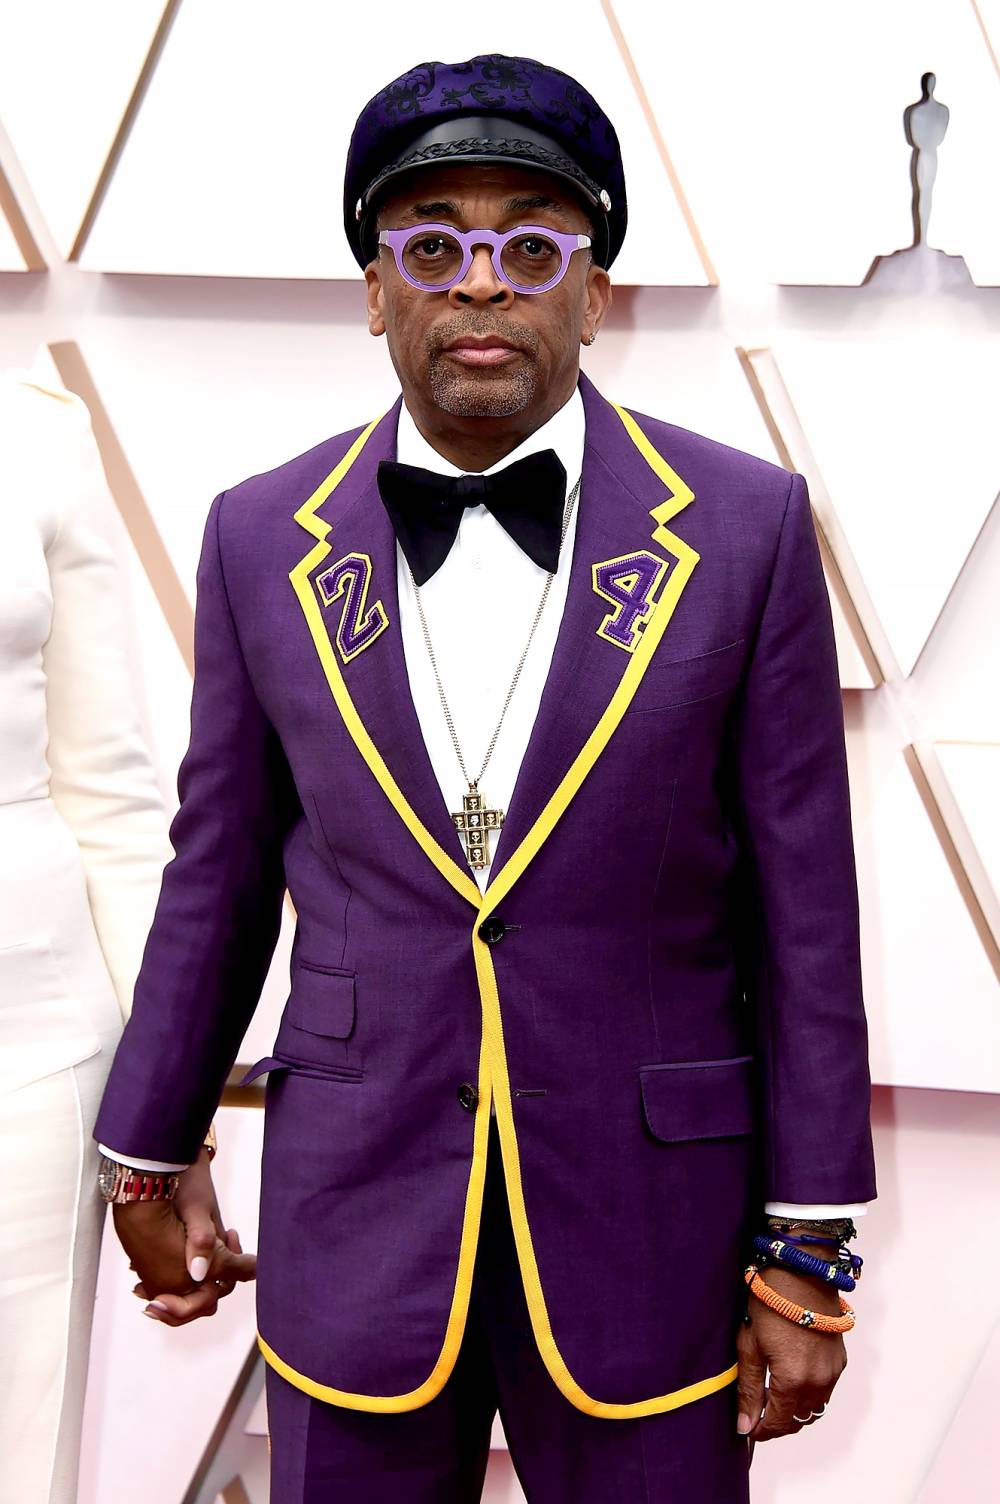 Spike Lee's Purple Suit at the Oscars Is a Tribute to Kobe Bryant